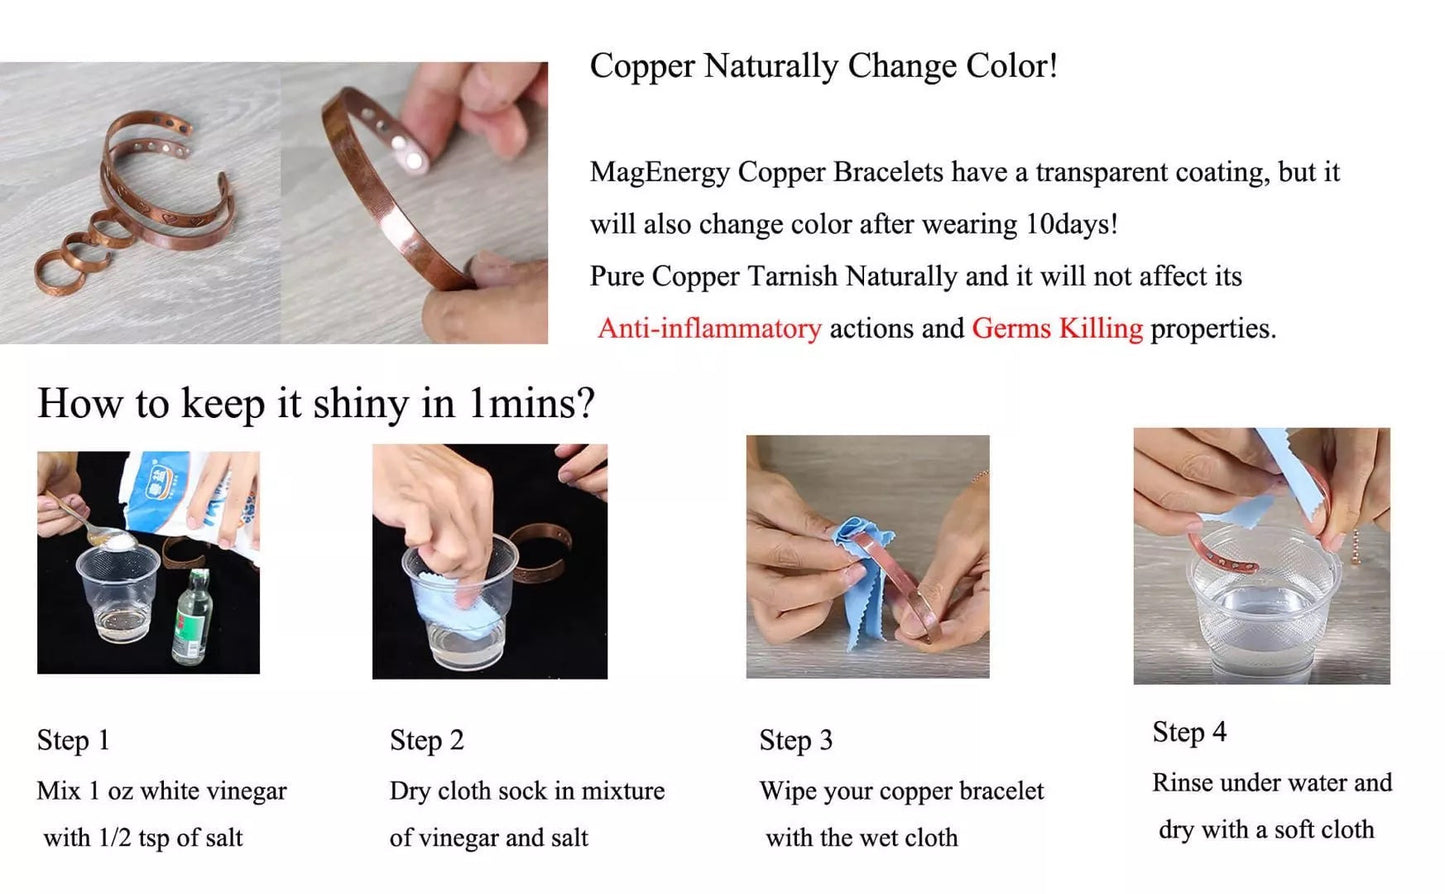 A1  100% Pure copper magnetic band 'Stingray'